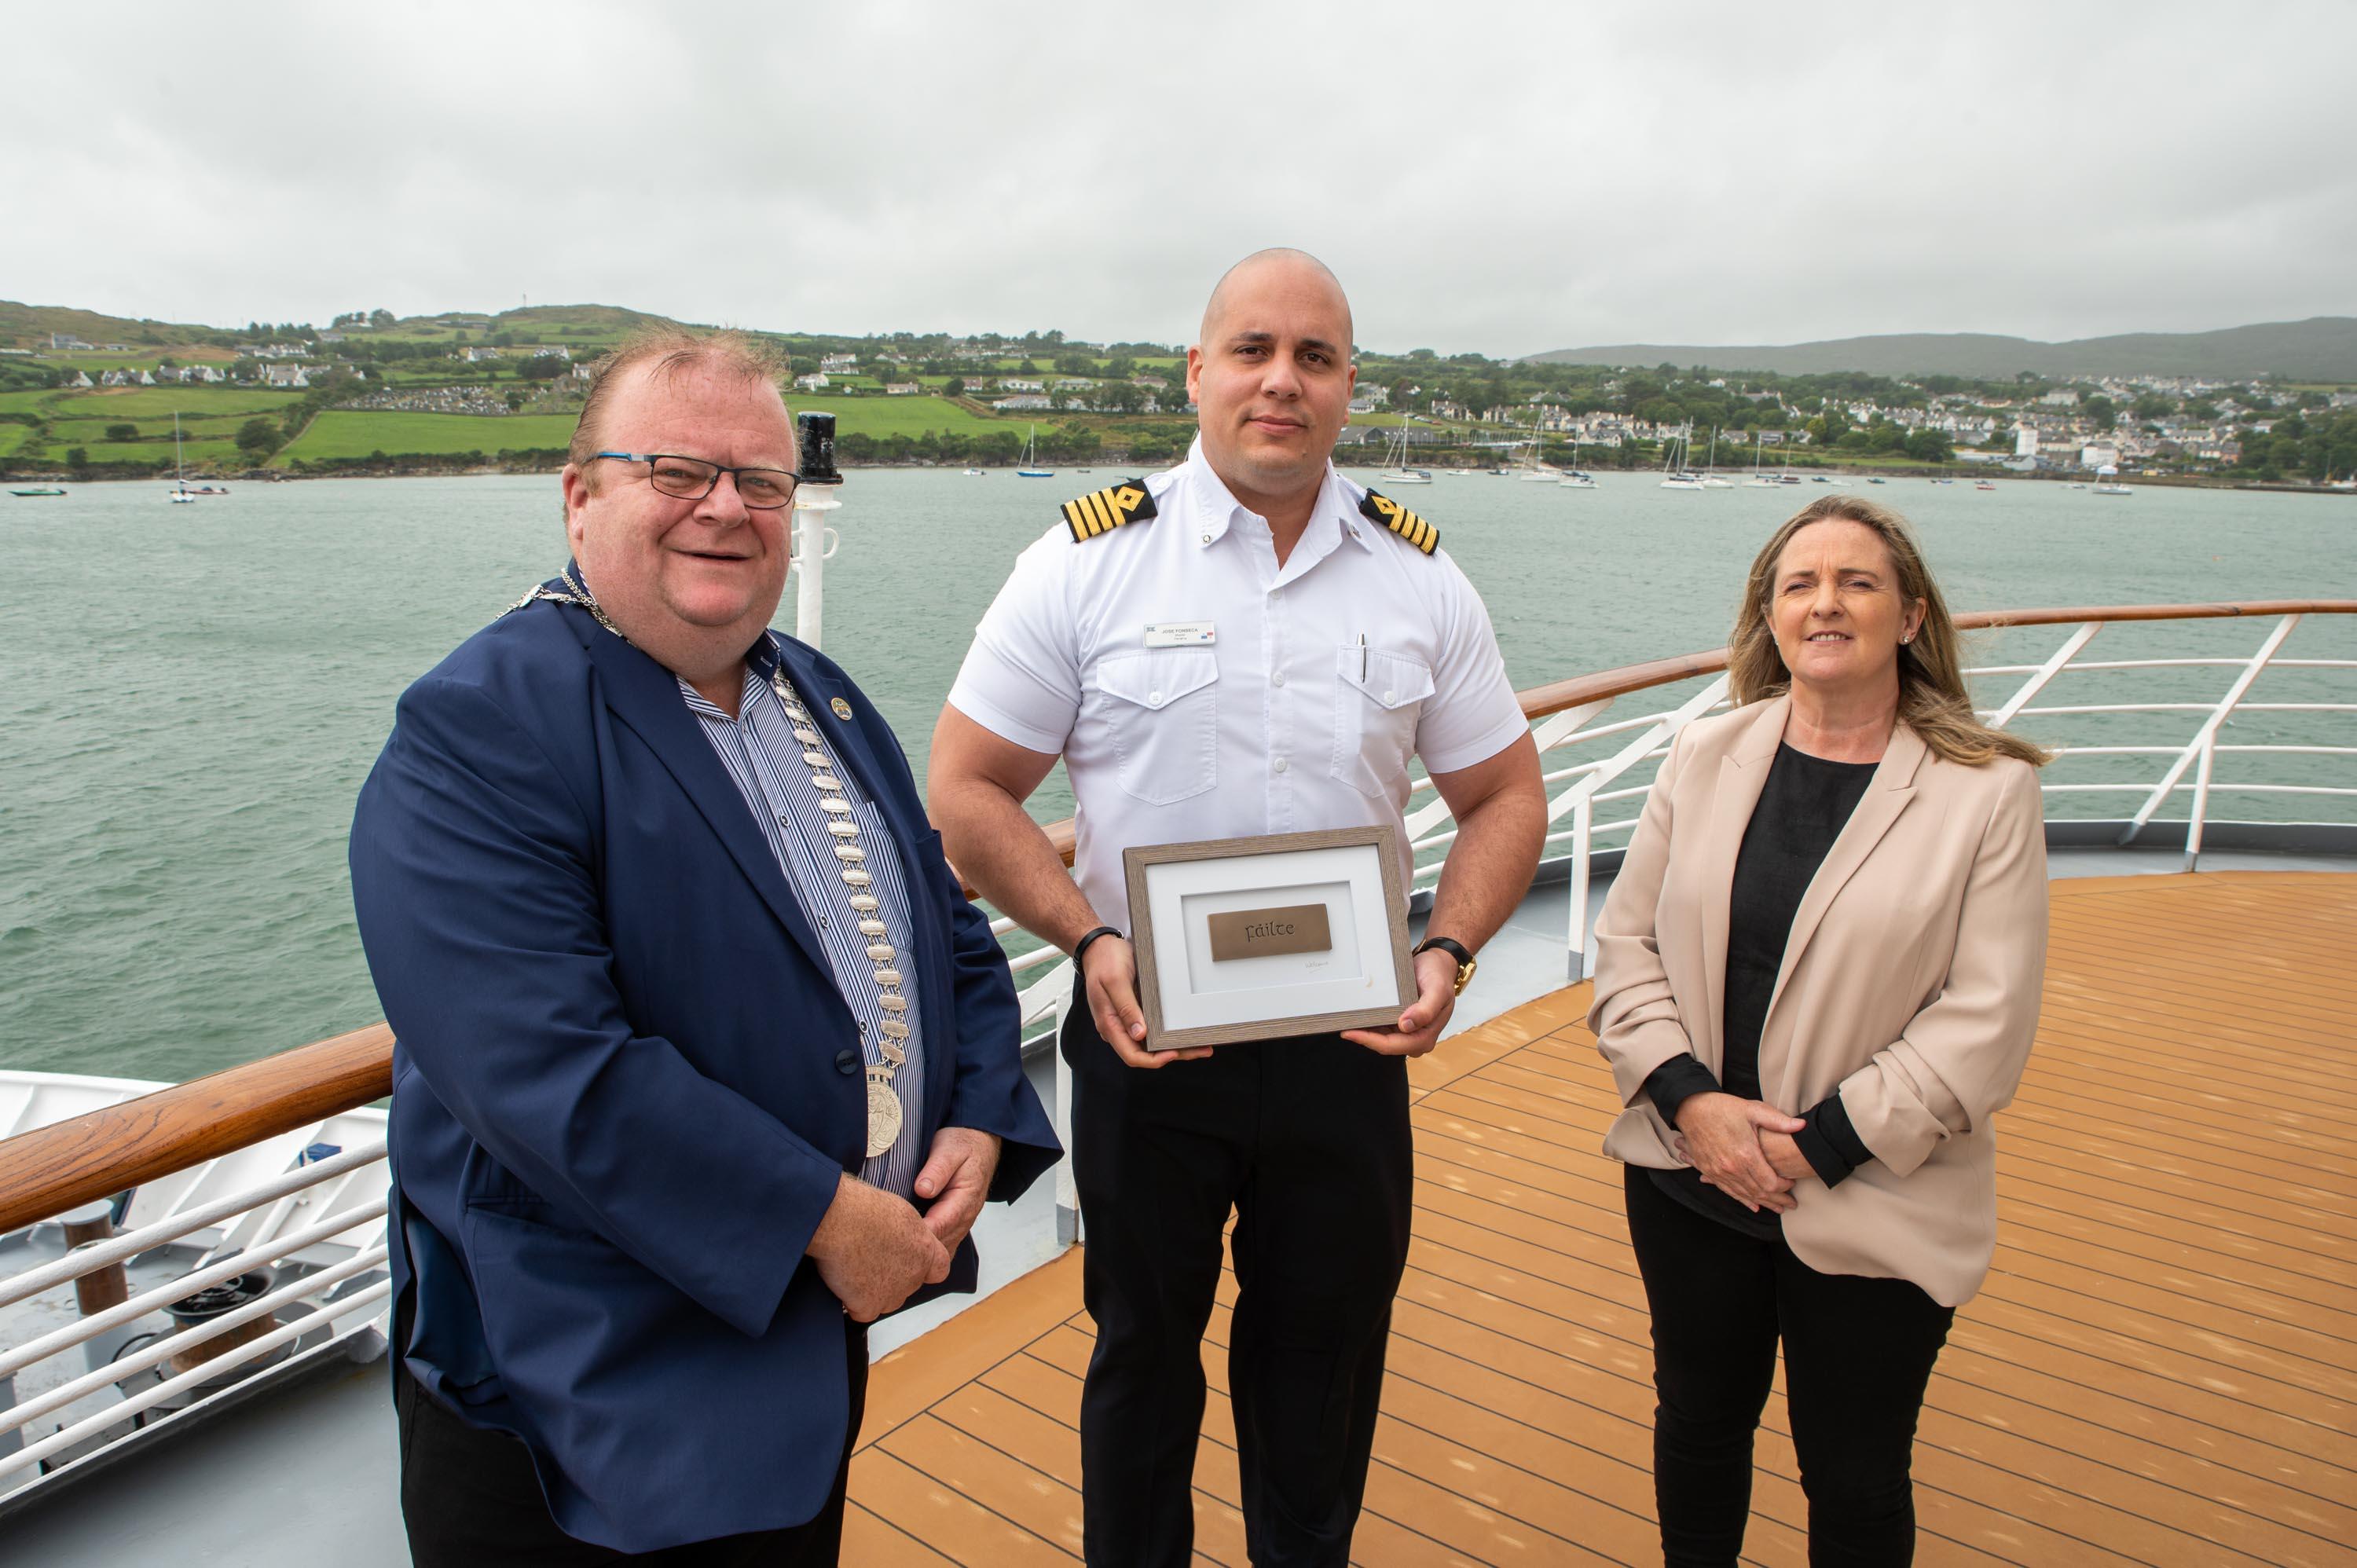 The Mayor of the County of Cork, Cllr. Danny Collins was on hand to welcome the cruise ship ‘Island Sky’ during its first visit to Schull when the Noble Caledonia vessel called to the West Cork town recently. 